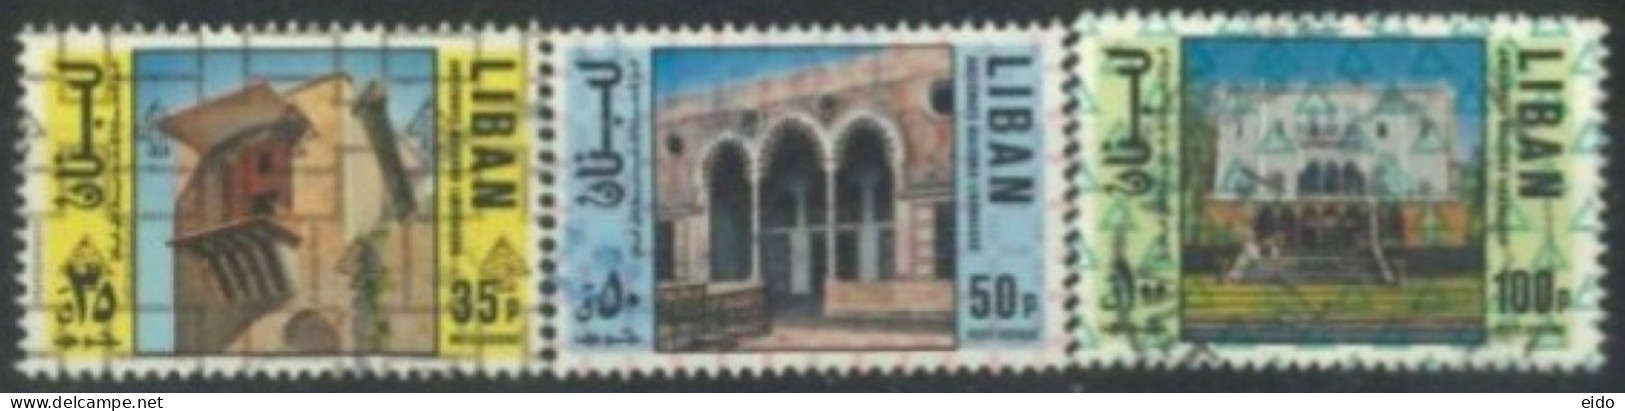 LEBANON. 1978, LEBANESE DOMESTIC ARCHITECTURE STAMPS ISSUES OF 1973 SURCHARG, COMPLETE SET OF 4, SG #1243/45 USED, - Liban